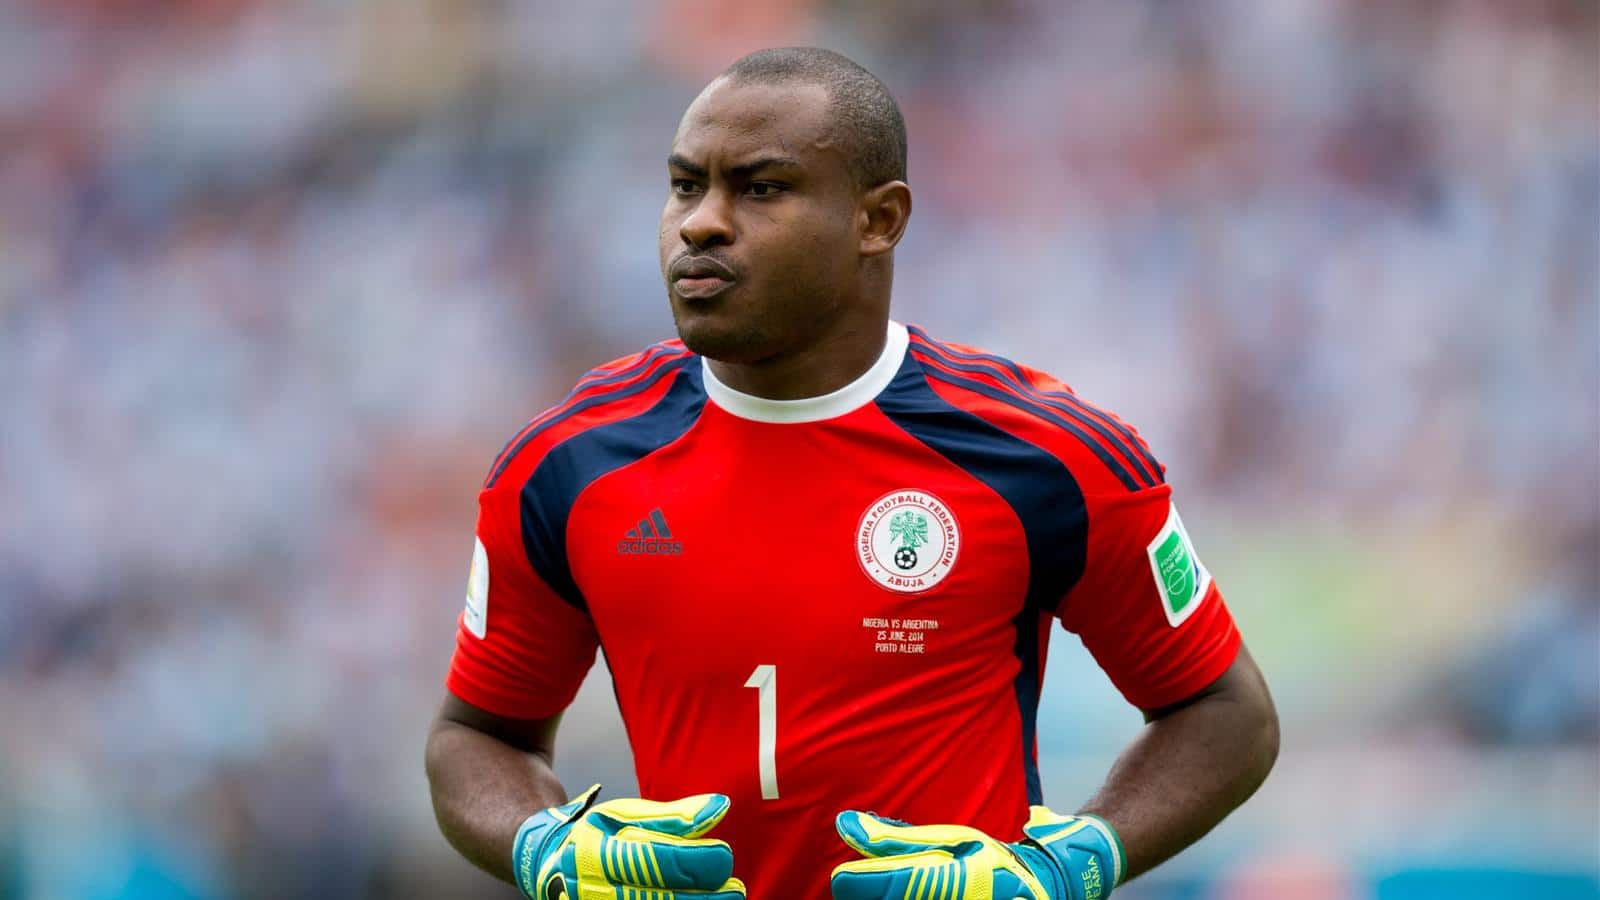 Enyeama reveals lack of interest in Super Eagles following forced exit